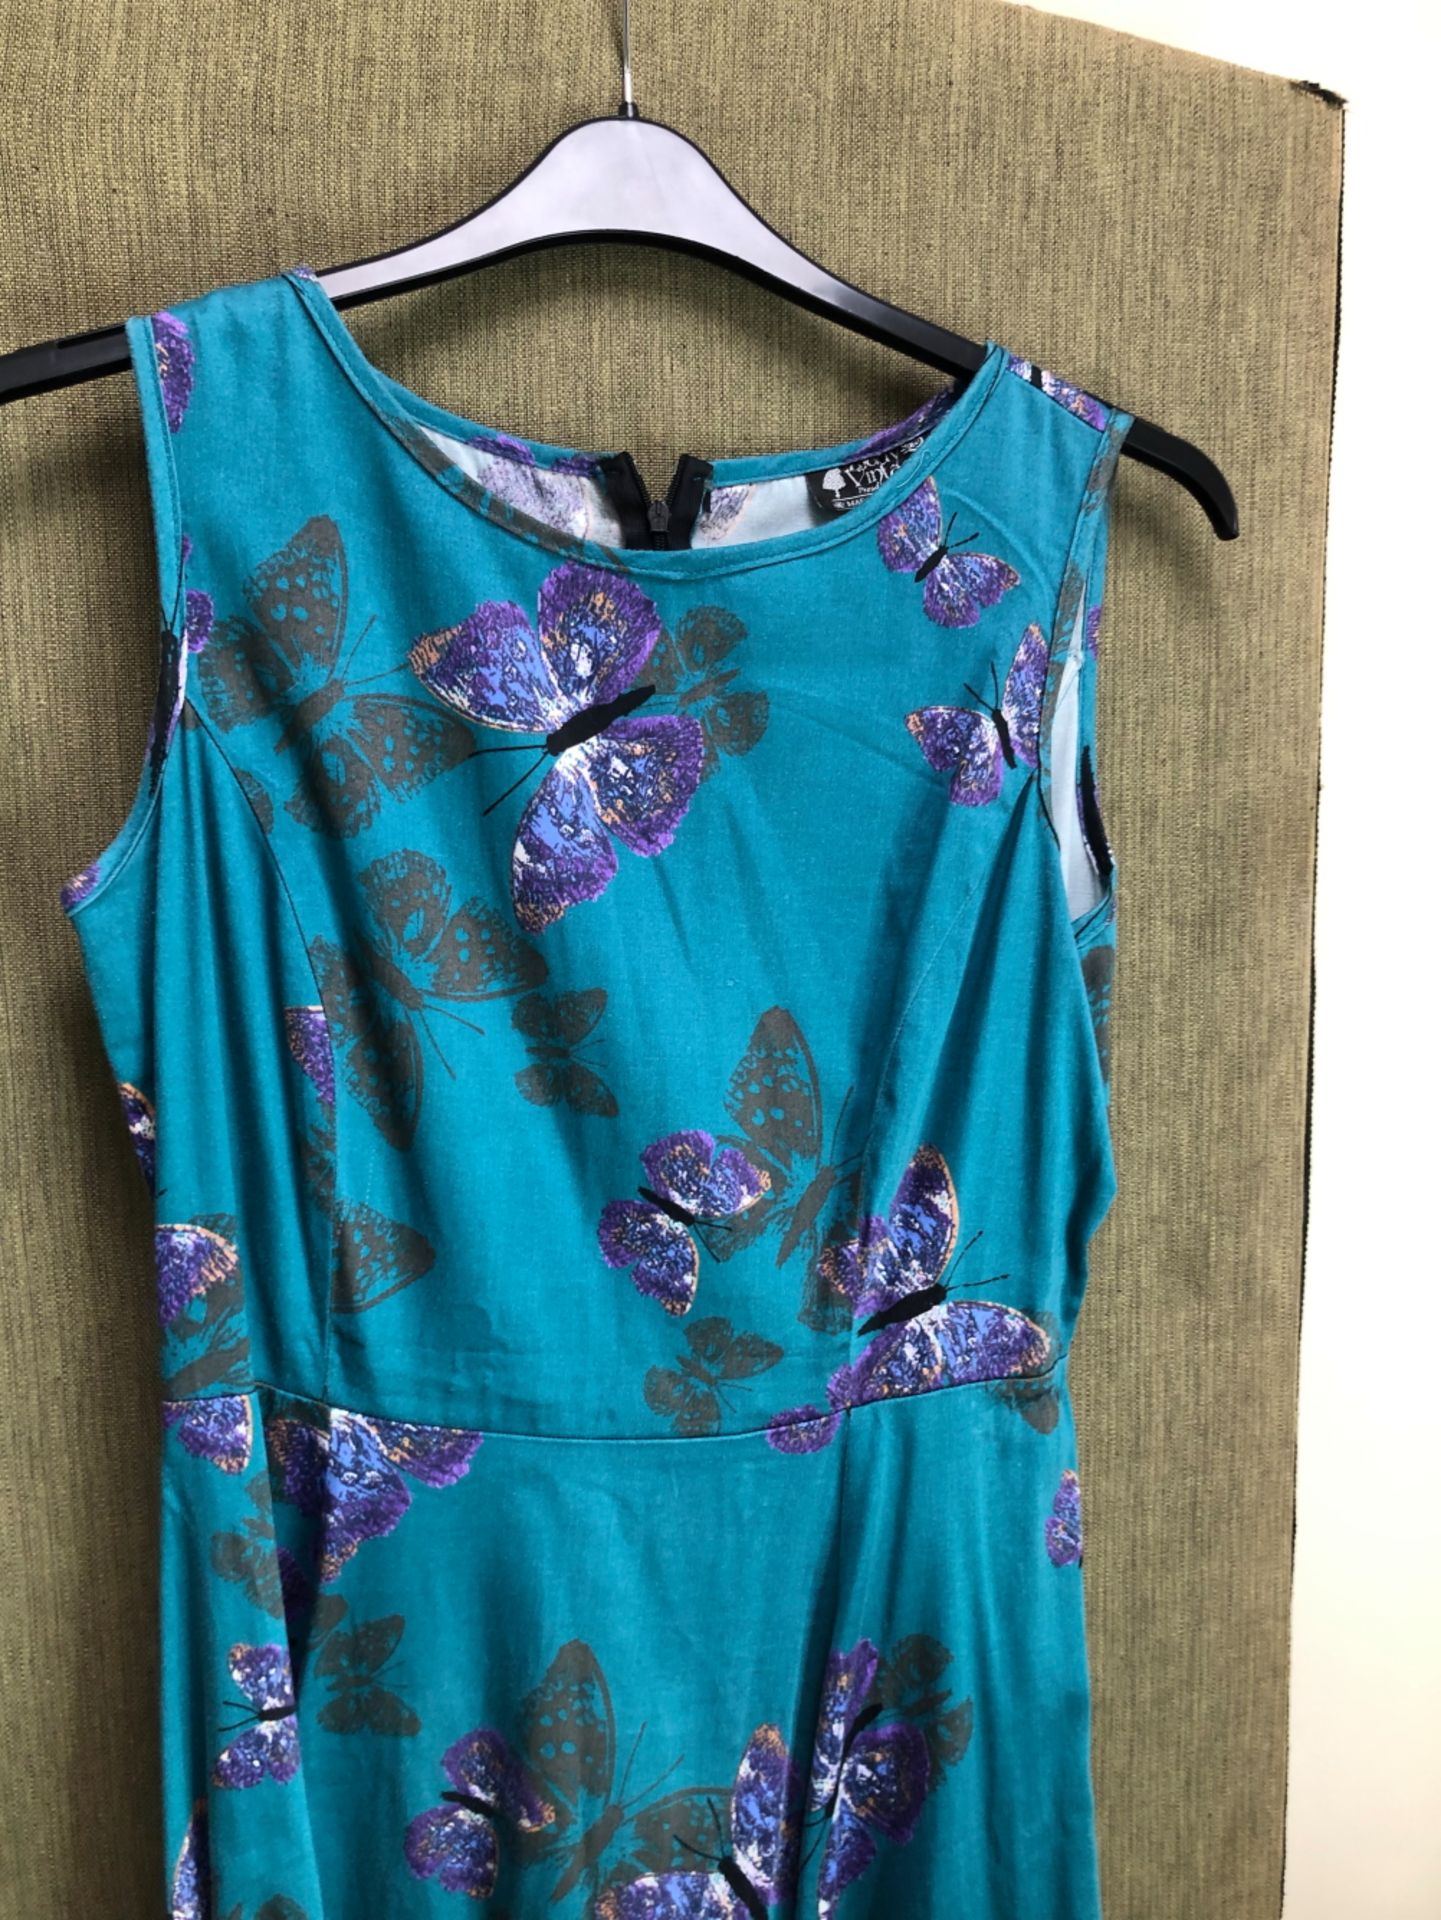 A LADY VINTAGE LONDON GREEN DRESS WITH PURPLE BUTTERFLIES SIZE 14 TOGETHER WITH LIQUORISH NAVY - Image 4 of 14